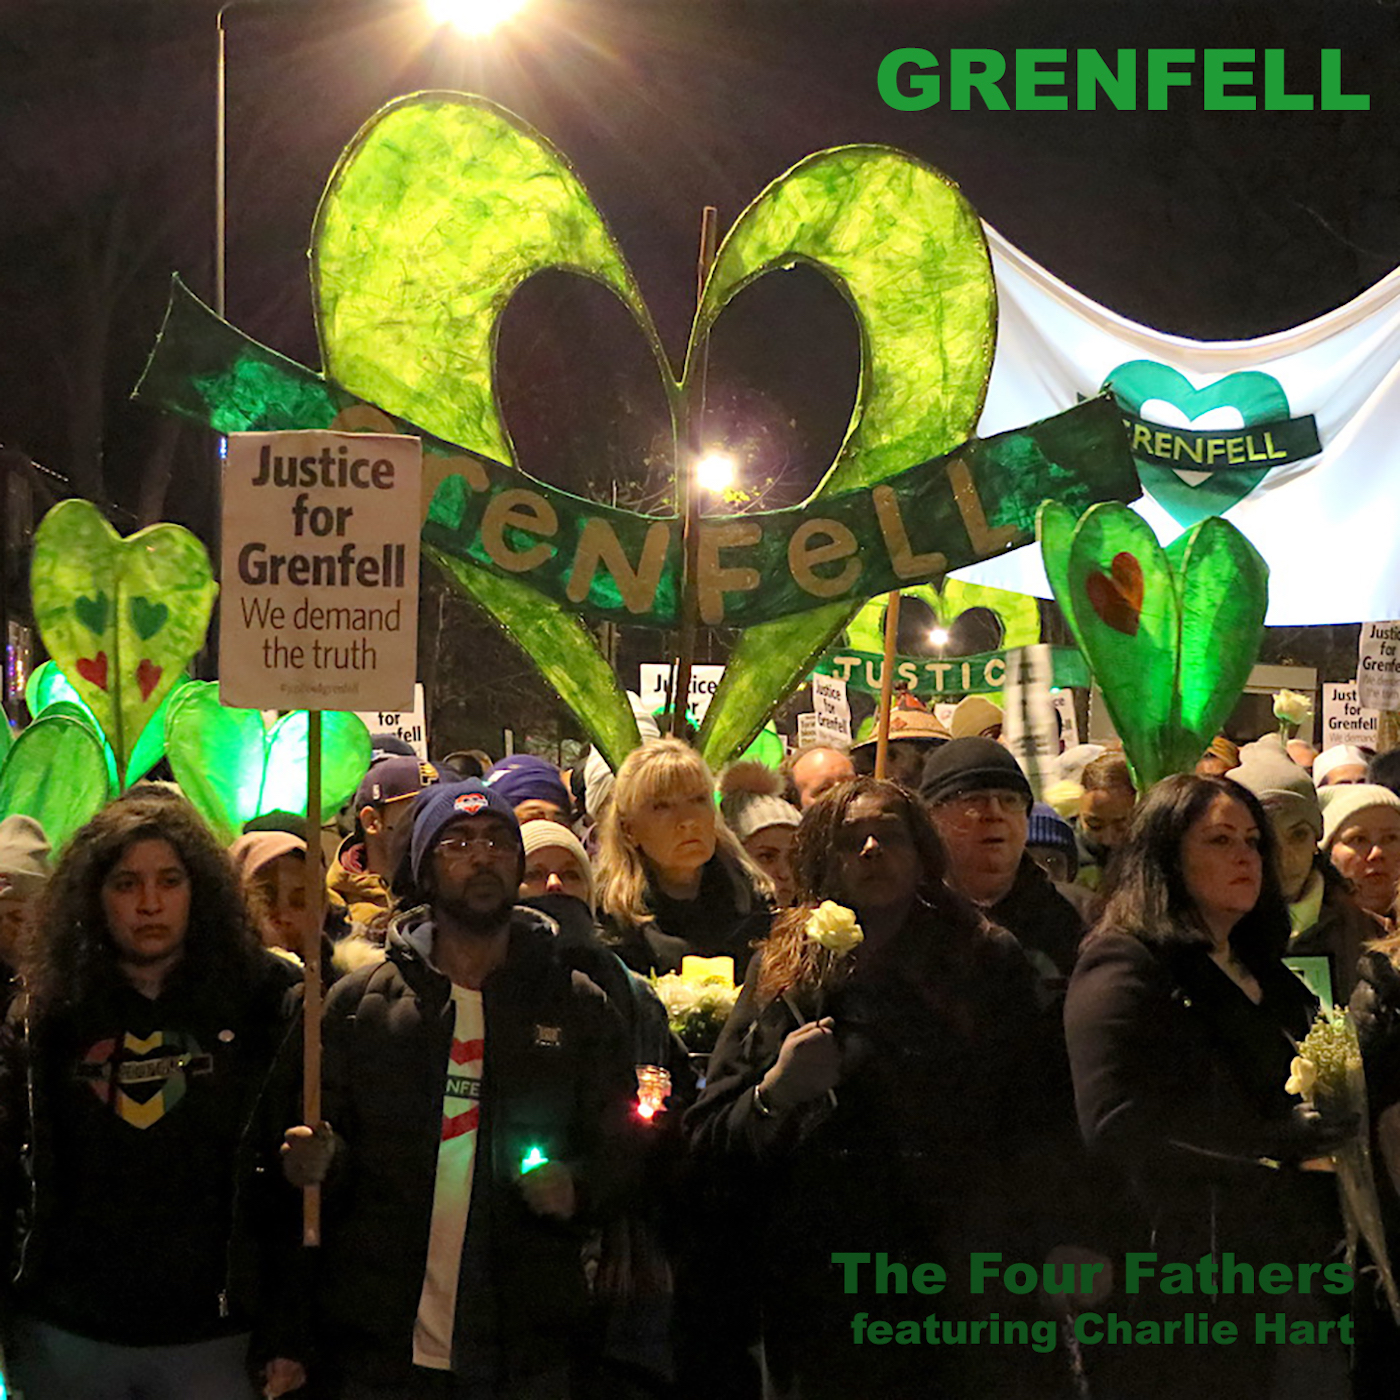 The cover of 'Grenfell' by The Four Fathers, featuring a photo taken in North Kensington on December 14, 2017 on one of the Silent Walks that take place on the 14th of every month (Photo: Andy Worthington).